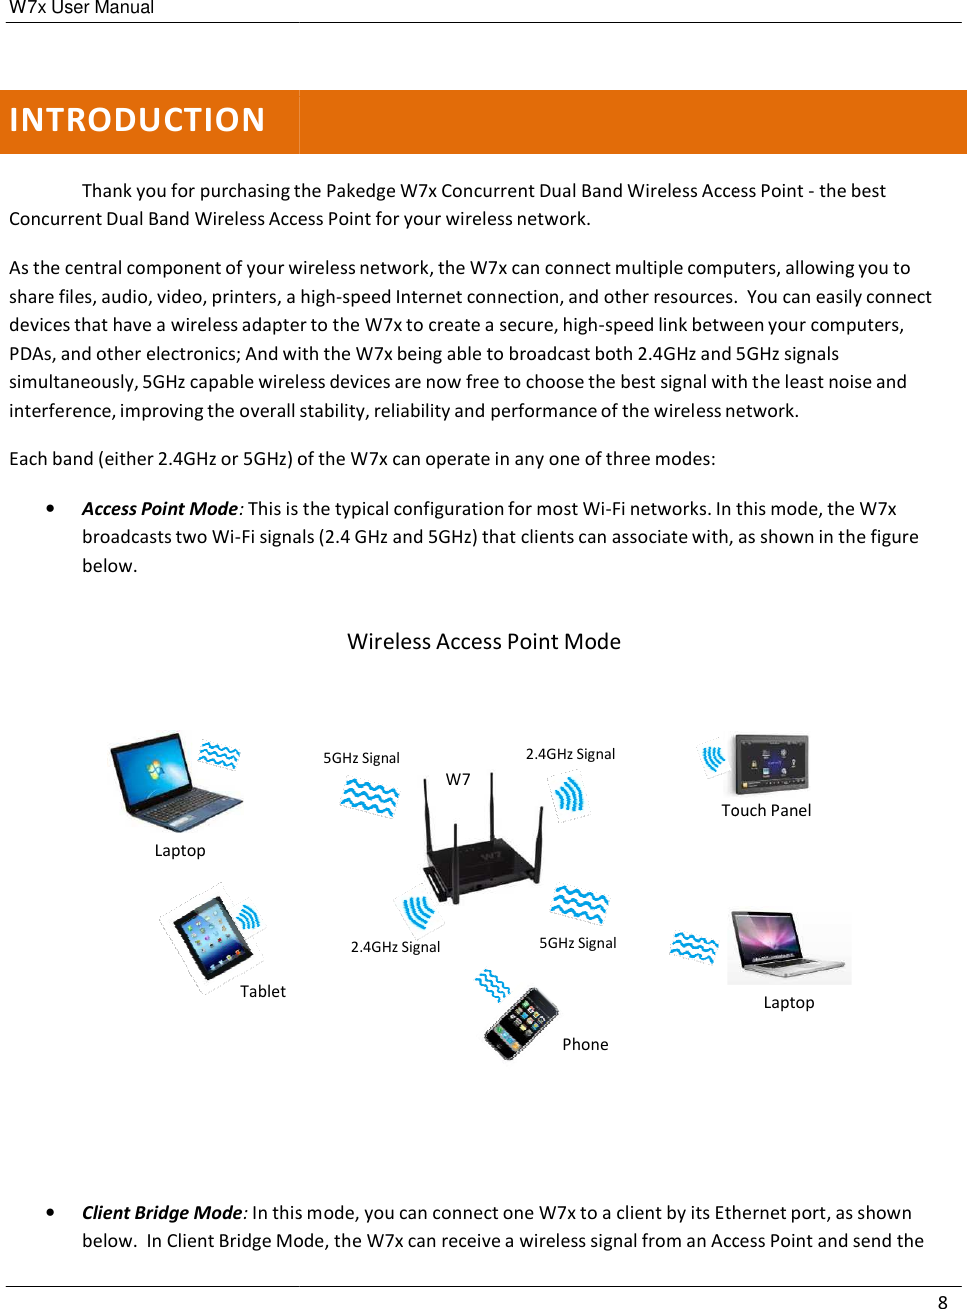 W7x User Manual       INTRODUCTION   Thank you for purchasing thConcurrent Dual Band Wireless Acce As the central component of your wshare files, audio, video, printers, a devices that have a wireless adapterPDAs, and other electronics; And withsimultaneously, 5GHz capable wirelinterference, improving the overall  Each band (either 2.4GHz or 5GHz) of •   Access Point Mode: This is broadcasts two Wi-Fi signabelow.        Laptop      Tablet         •   Client Bridge Mode: In thisbelow.  In Client Bridge Mothe Pakedge W7x Concurrent Dual Band Wireless Acceess Point for your wireless network. wireless network, the W7x can connect multiple compua high-speed Internet connection, and other resources.ter to the W7x to create a secure, high-speed link betwewith the W7x being able to broadcast both 2.4GHz and less devices are now free to choose the best signal wit stability, reliability and performance of the wireless nof the W7x can operate in any one of three modes:  the typical configuration for most Wi-Fi networks. In als (2.4 GHz and 5GHz) that clients can associate with, Wireless Access Point Mode 5GHz Signal W7 2.4GHz Signal    Touch 2.4GHz Signal  5GHz Signal    Phone is mode, you can connect one W7x to a client by its EthMode, the W7x can receive a wireless signal from an Acc8 ess Point - the best uters, allowing you to .  You can easily connect een your computers,  5GHz signals th the least noise and network.  this mode, the W7x  as shown in the figure    Touch Panel Laptop hernet port, as shown Access Point and send the 